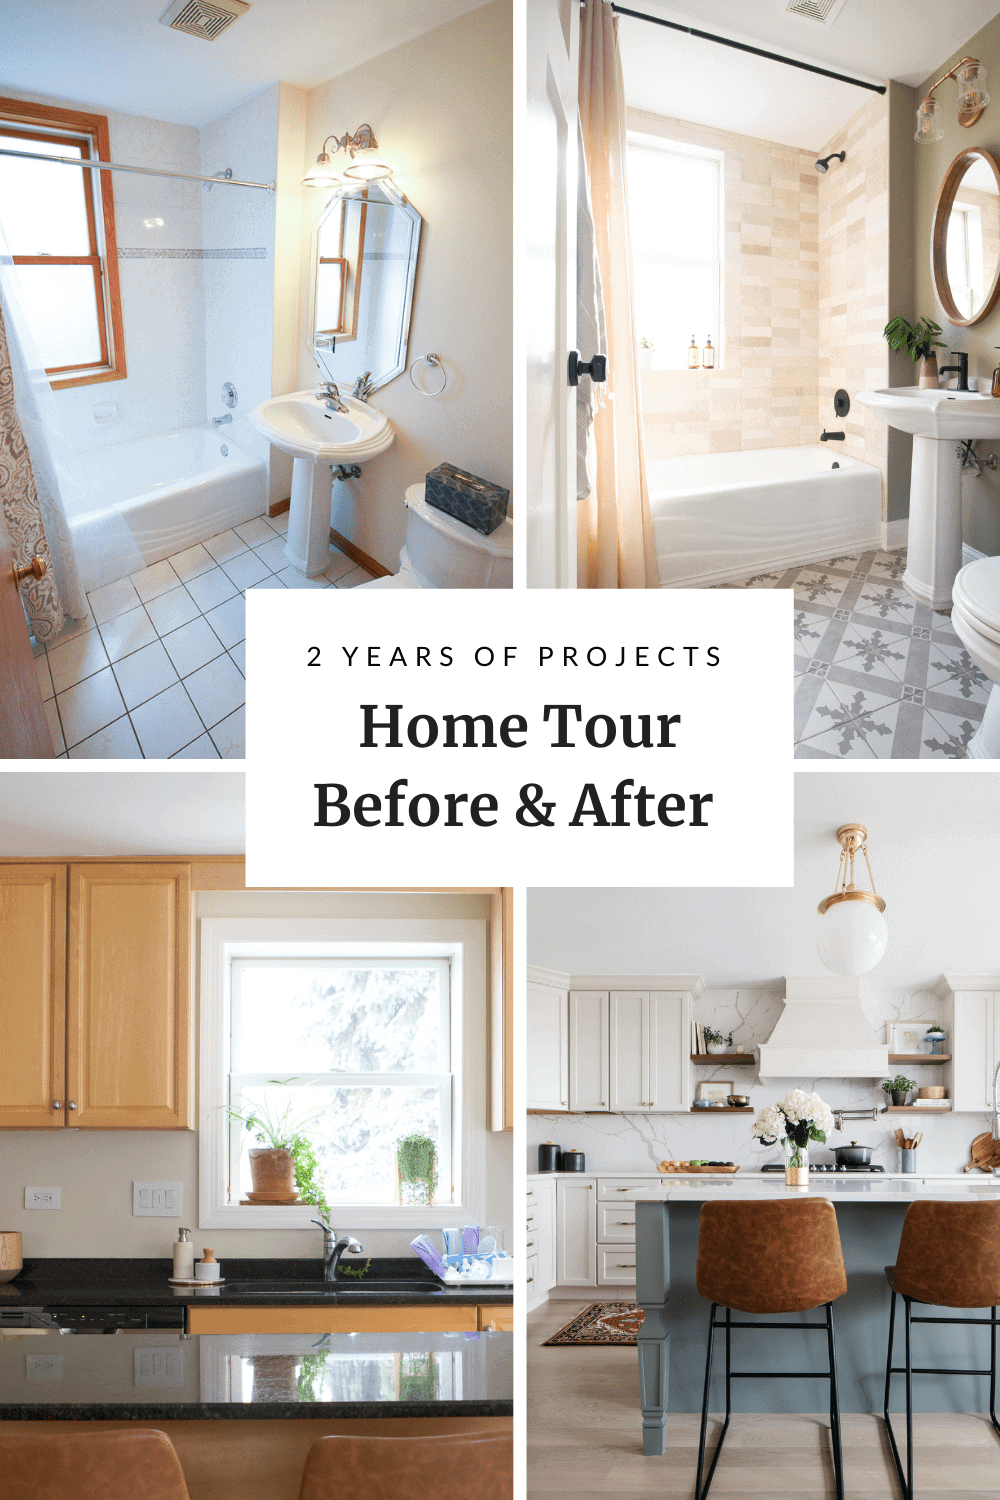 Our home tour before and after